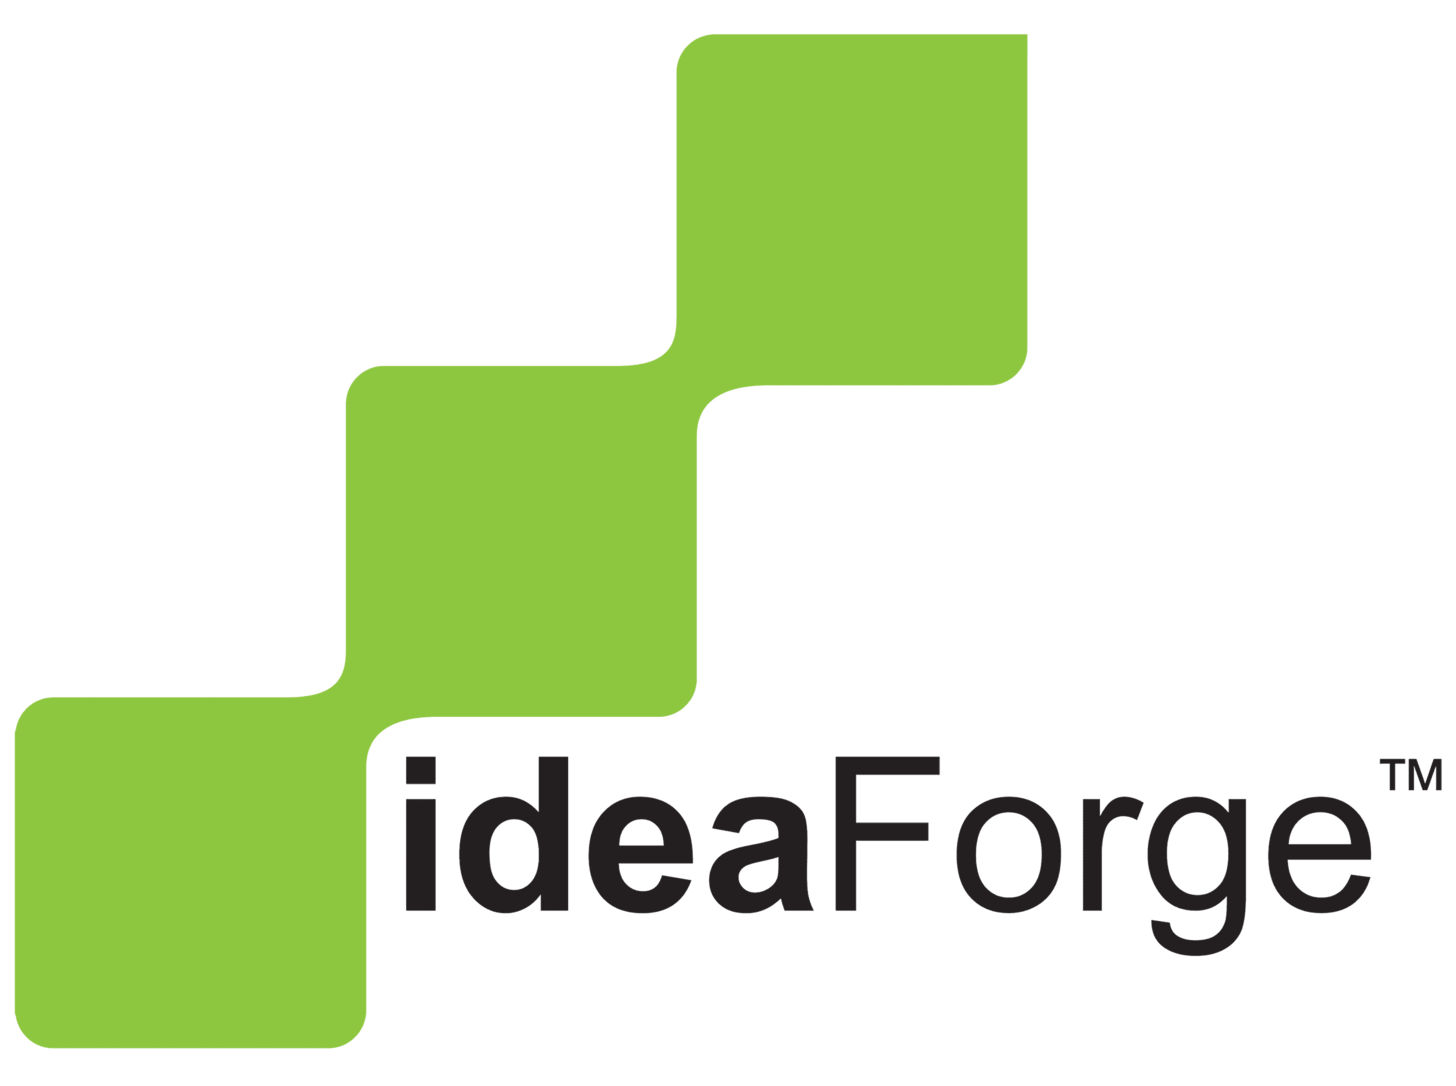 Drone Maker ideaForge Secures ₹255 Crore Funding from Anchor Investors ahead of IPO